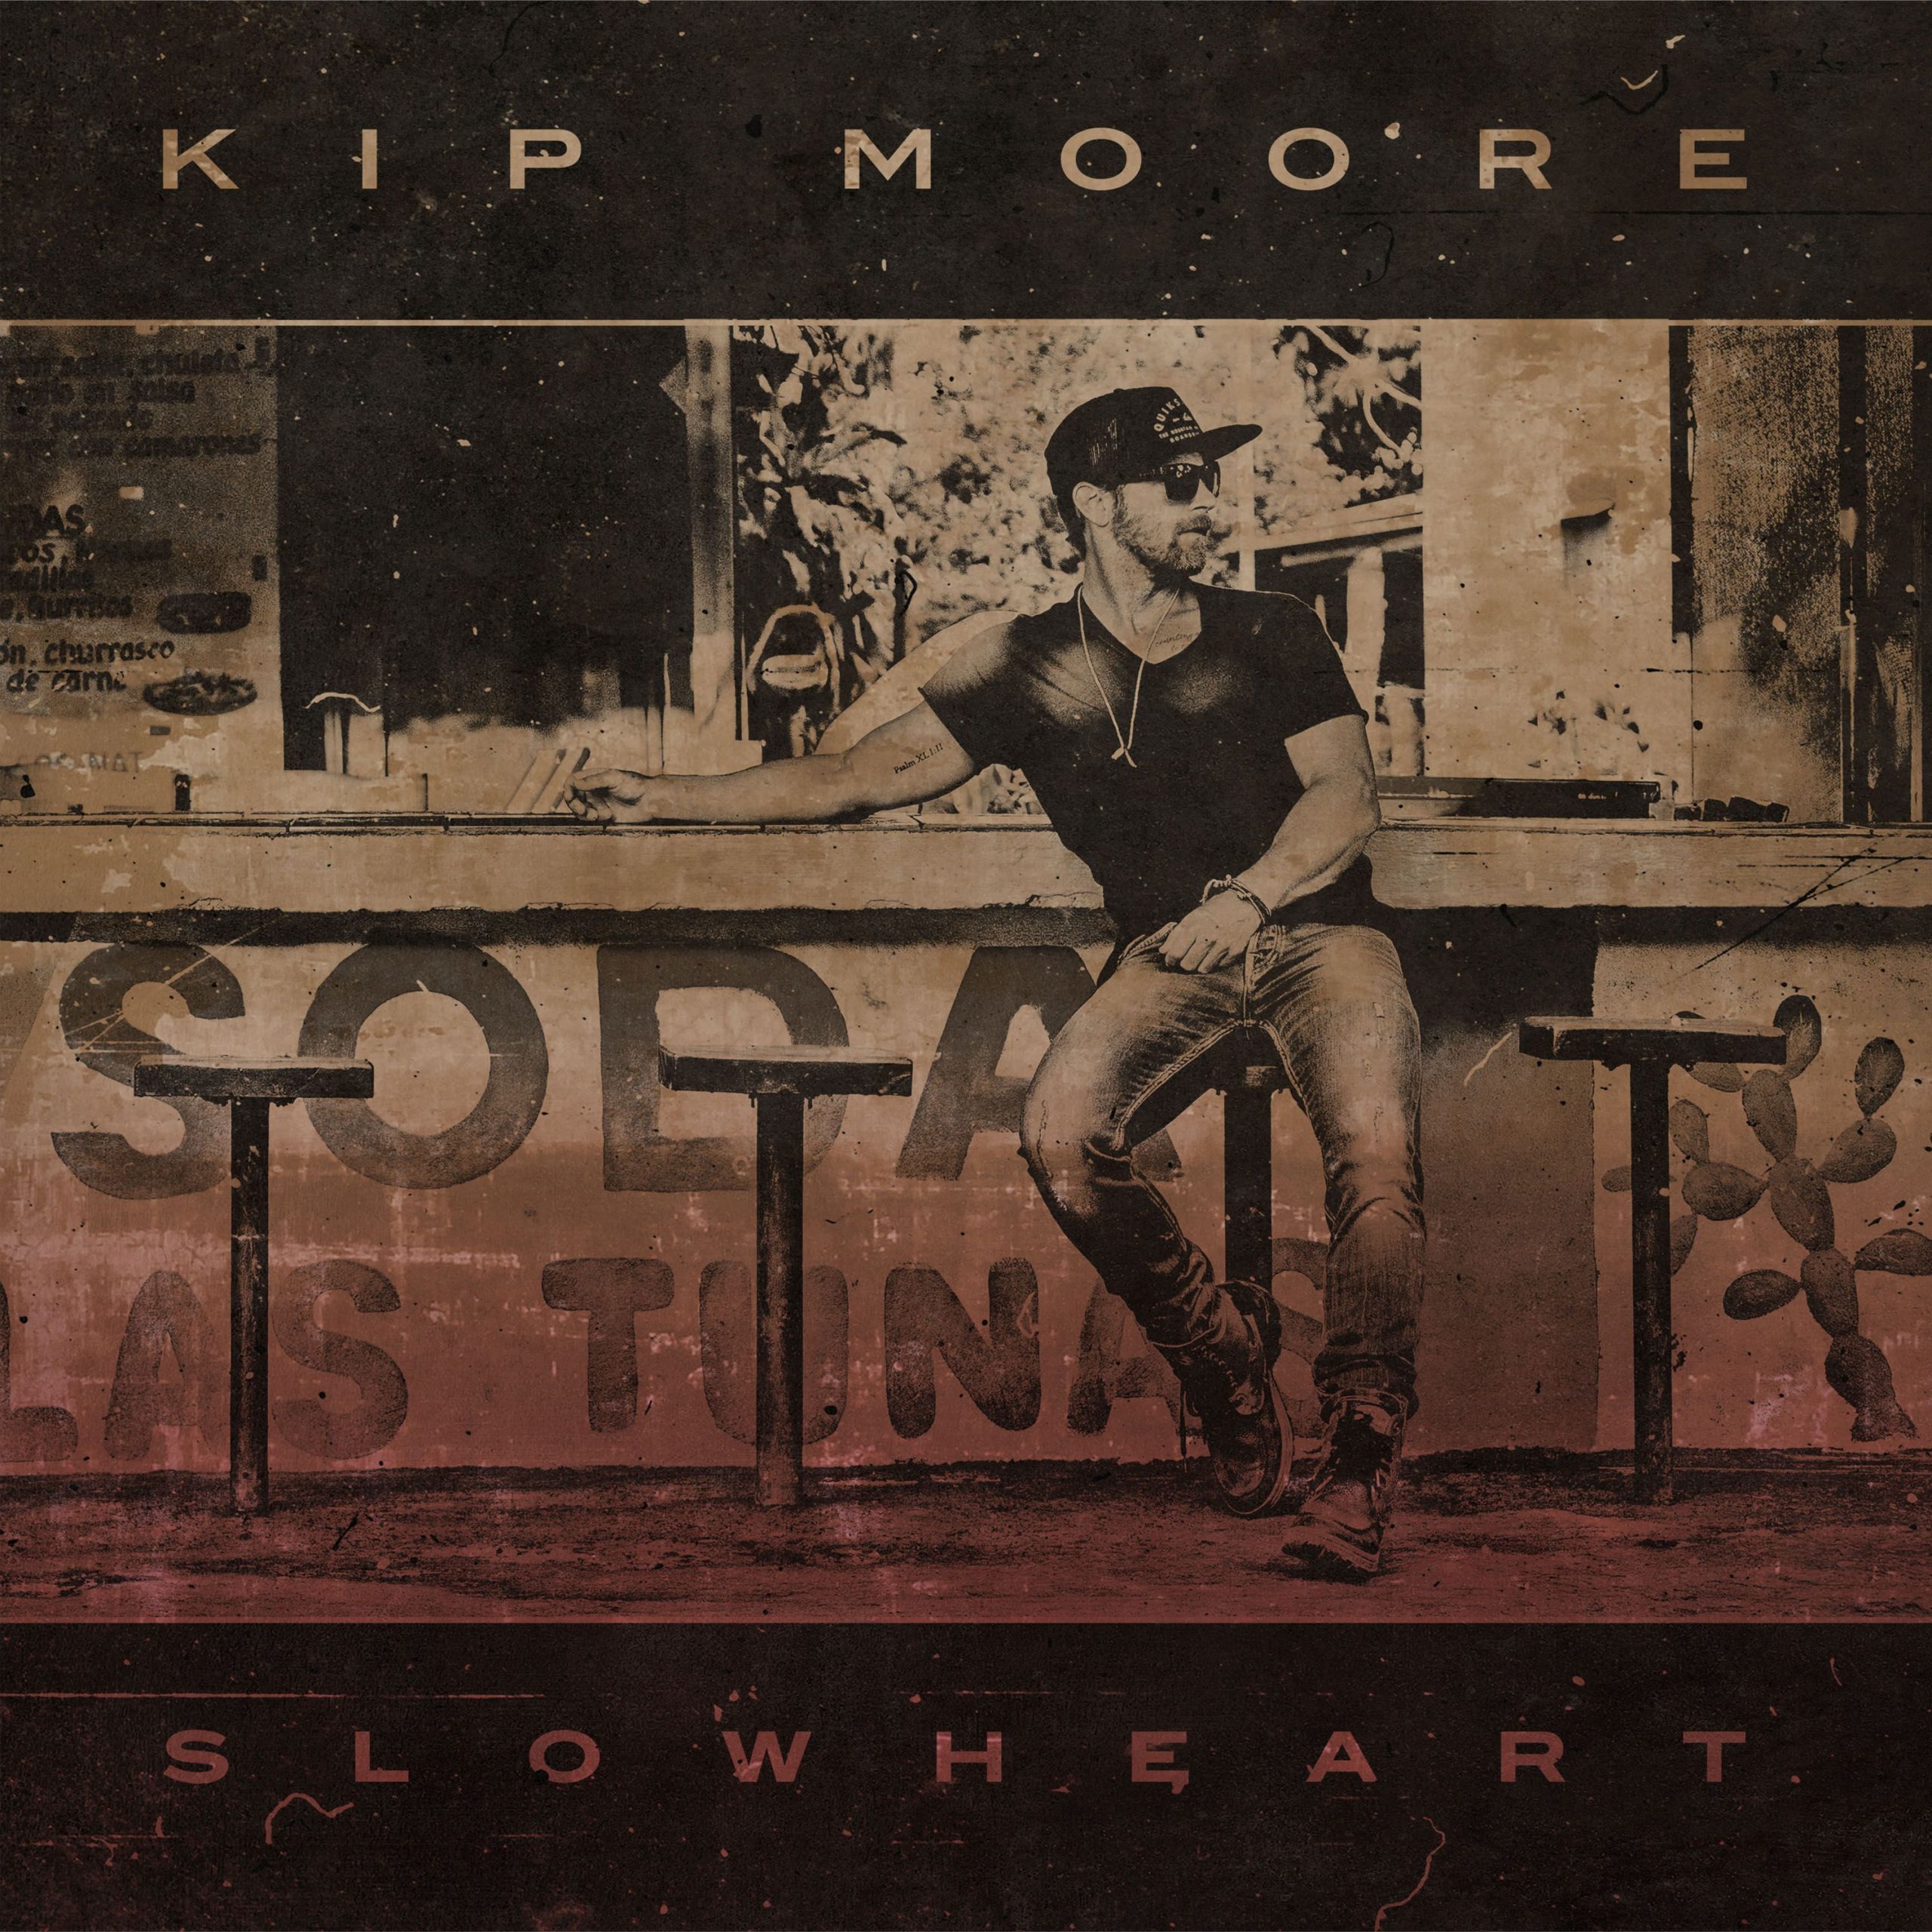 KIP MOORE “PULLS NO PUNCHES” AS HE PREMIERES NEW TRACK AND MUSIC VIDEO FOR “BLONDE” EXCLUSIVELY ON NOISEY